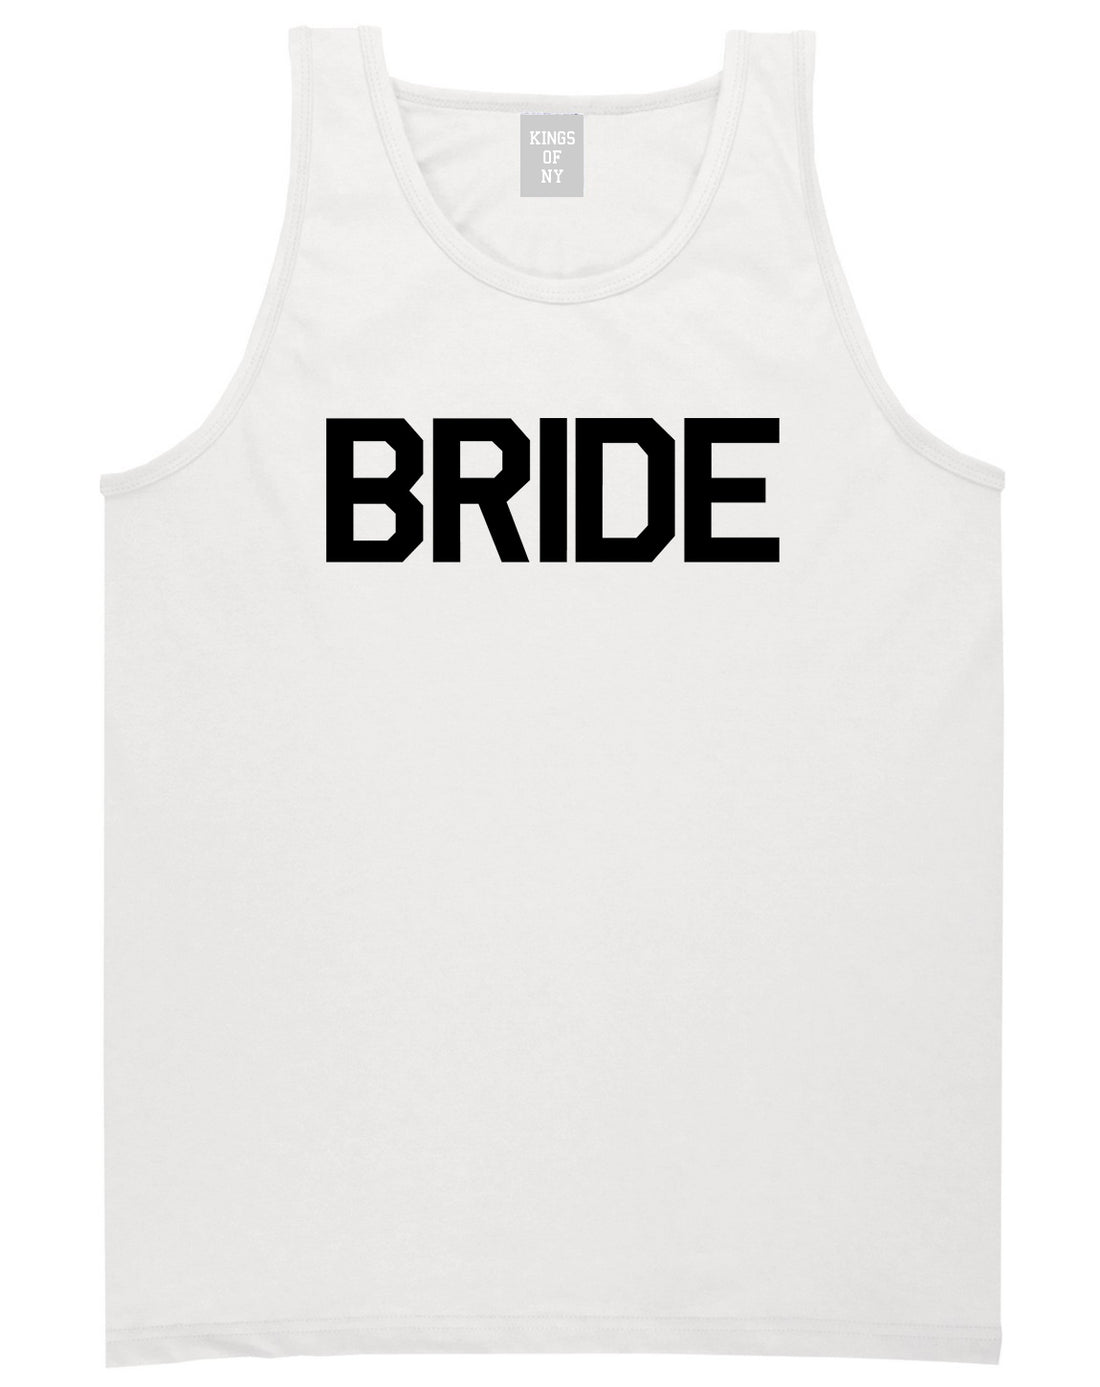 Bride Bachlorette Party White Tank Top Shirt by Kings Of NY